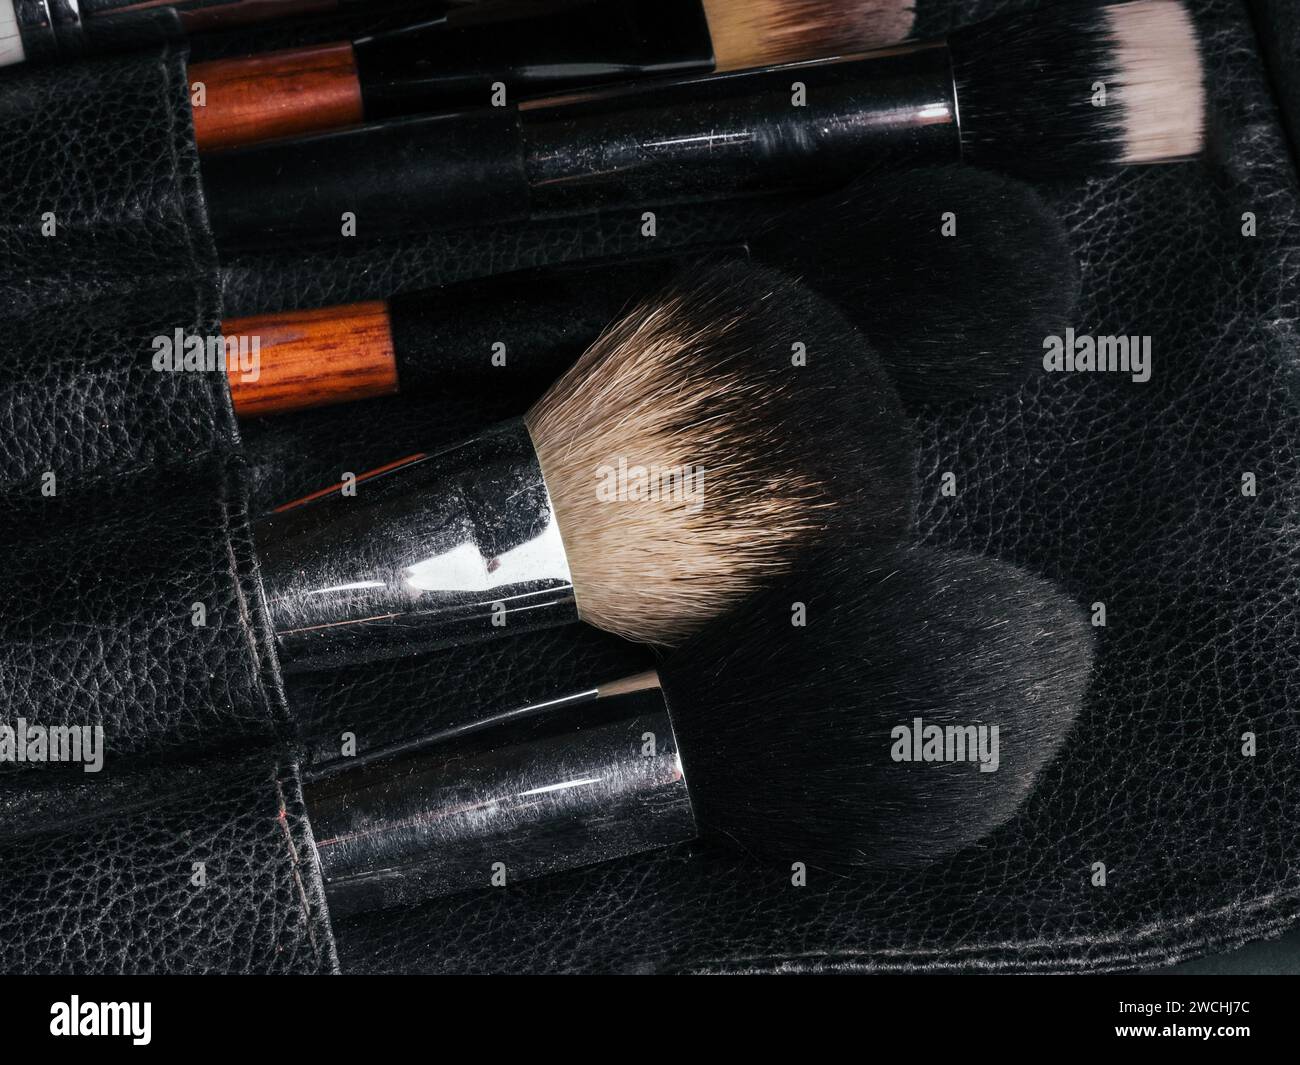 makeup brushes in professional leather case close-up Stock Photo